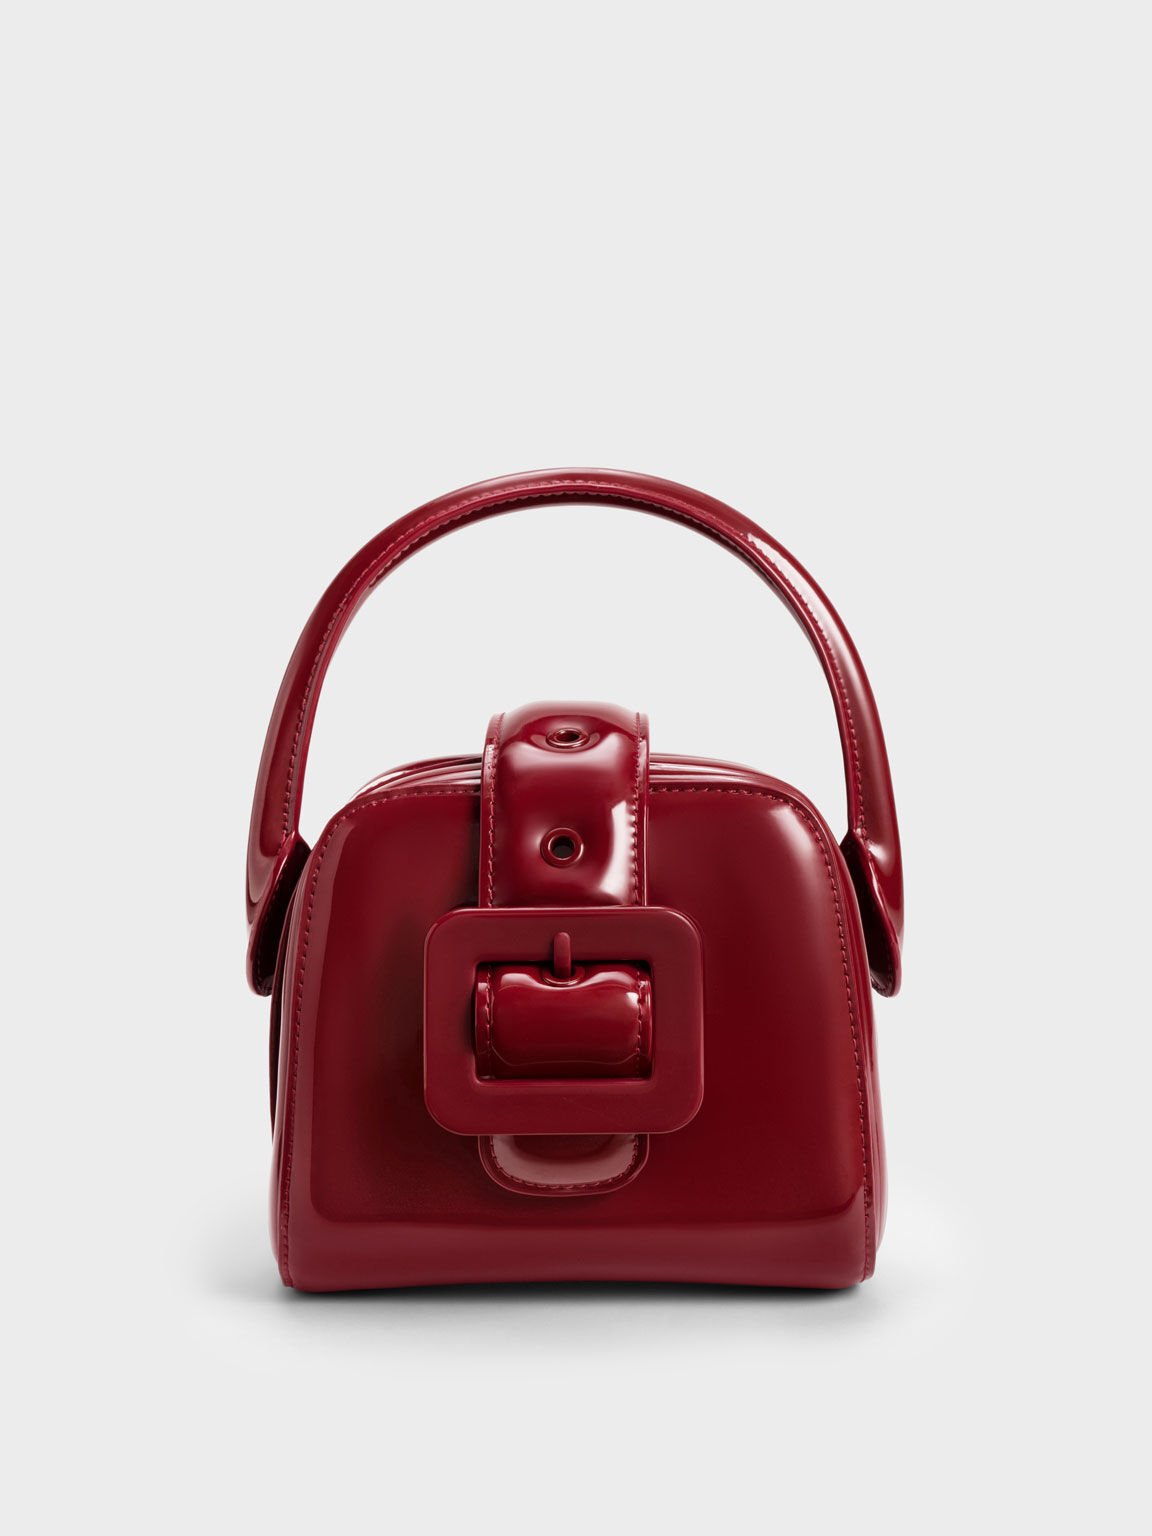 Why you need a red bag in your collection